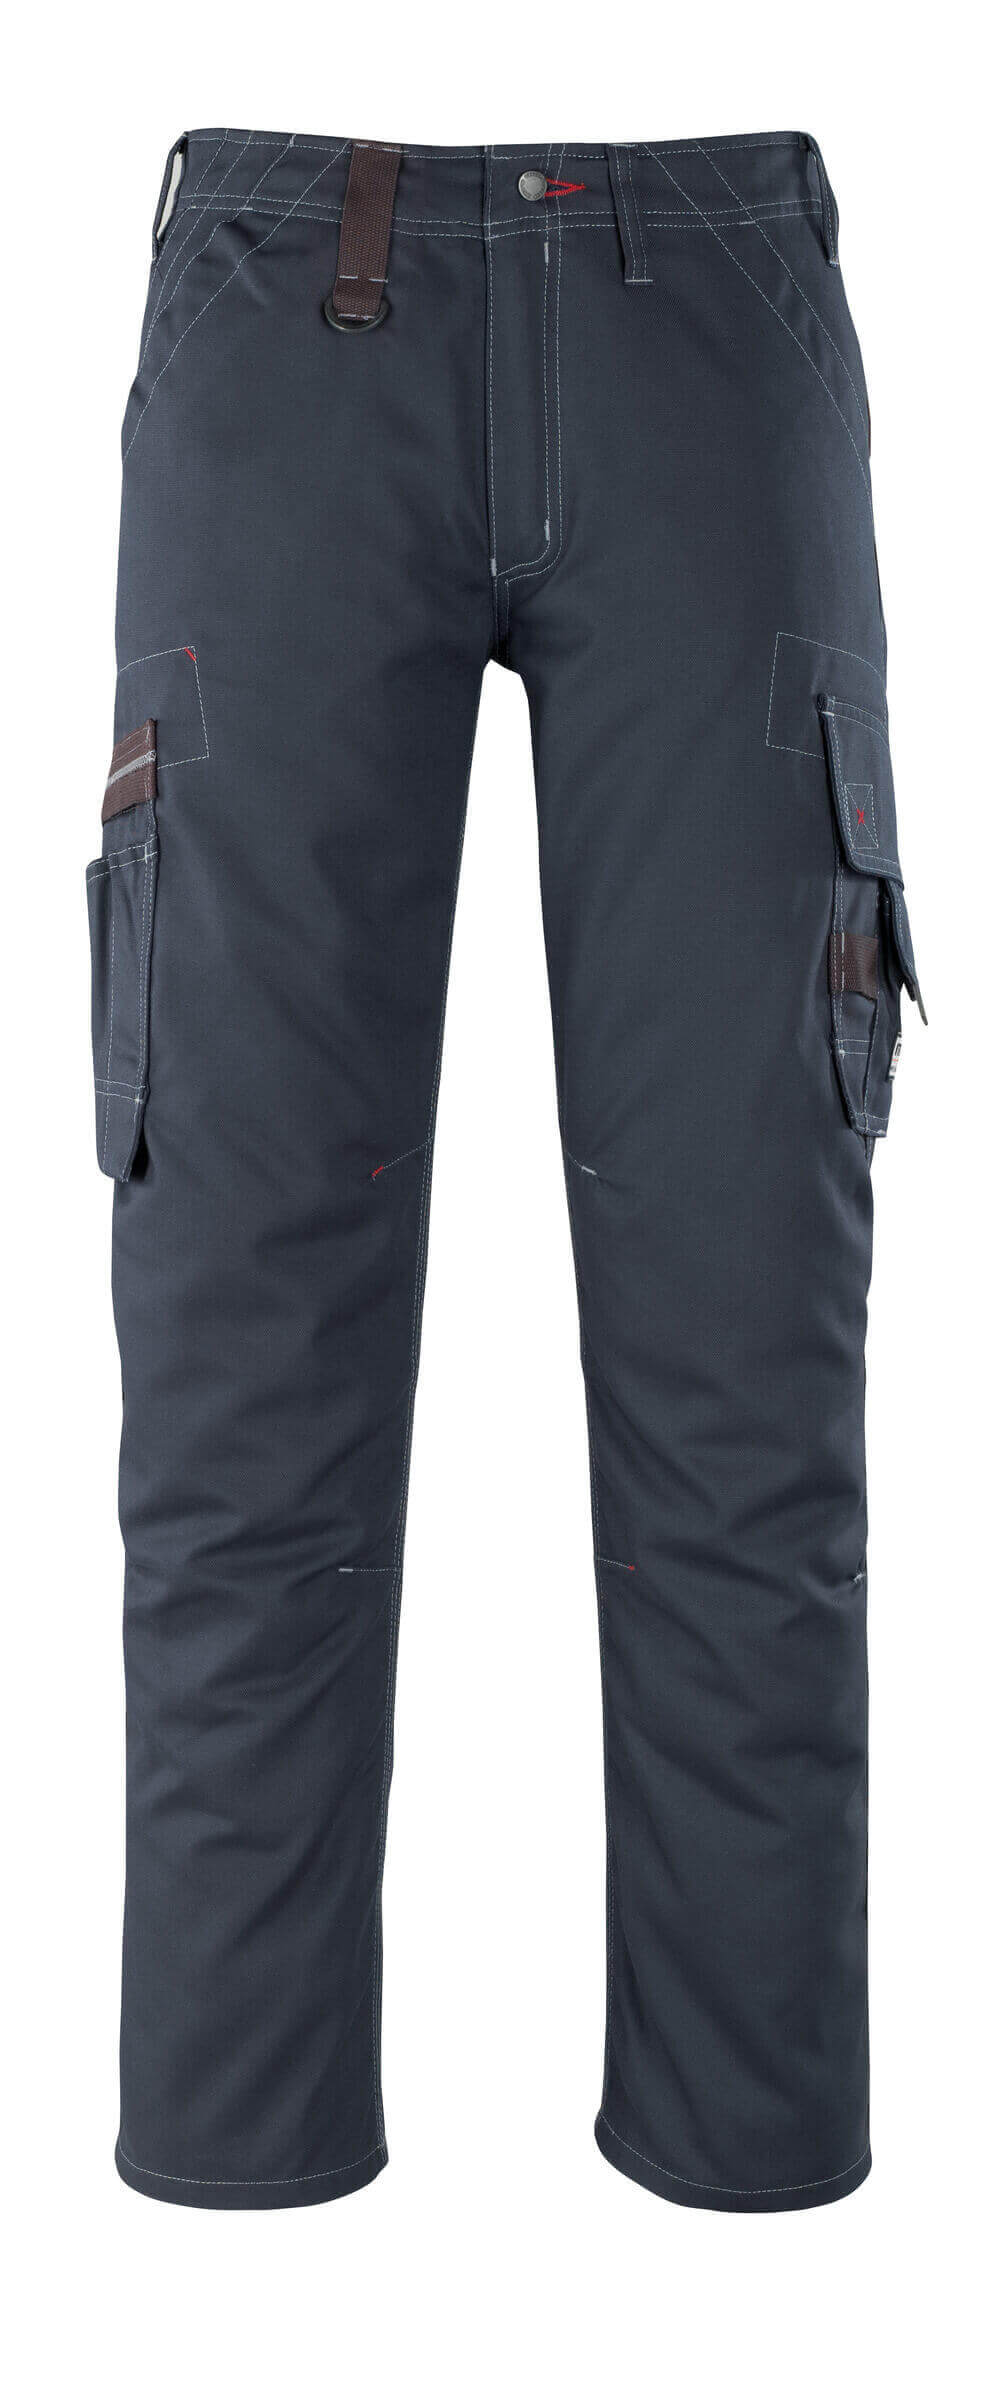 MASCOT®FRONTLINE Trousers with thigh pockets Rhodos 7279 - DaltonSafety